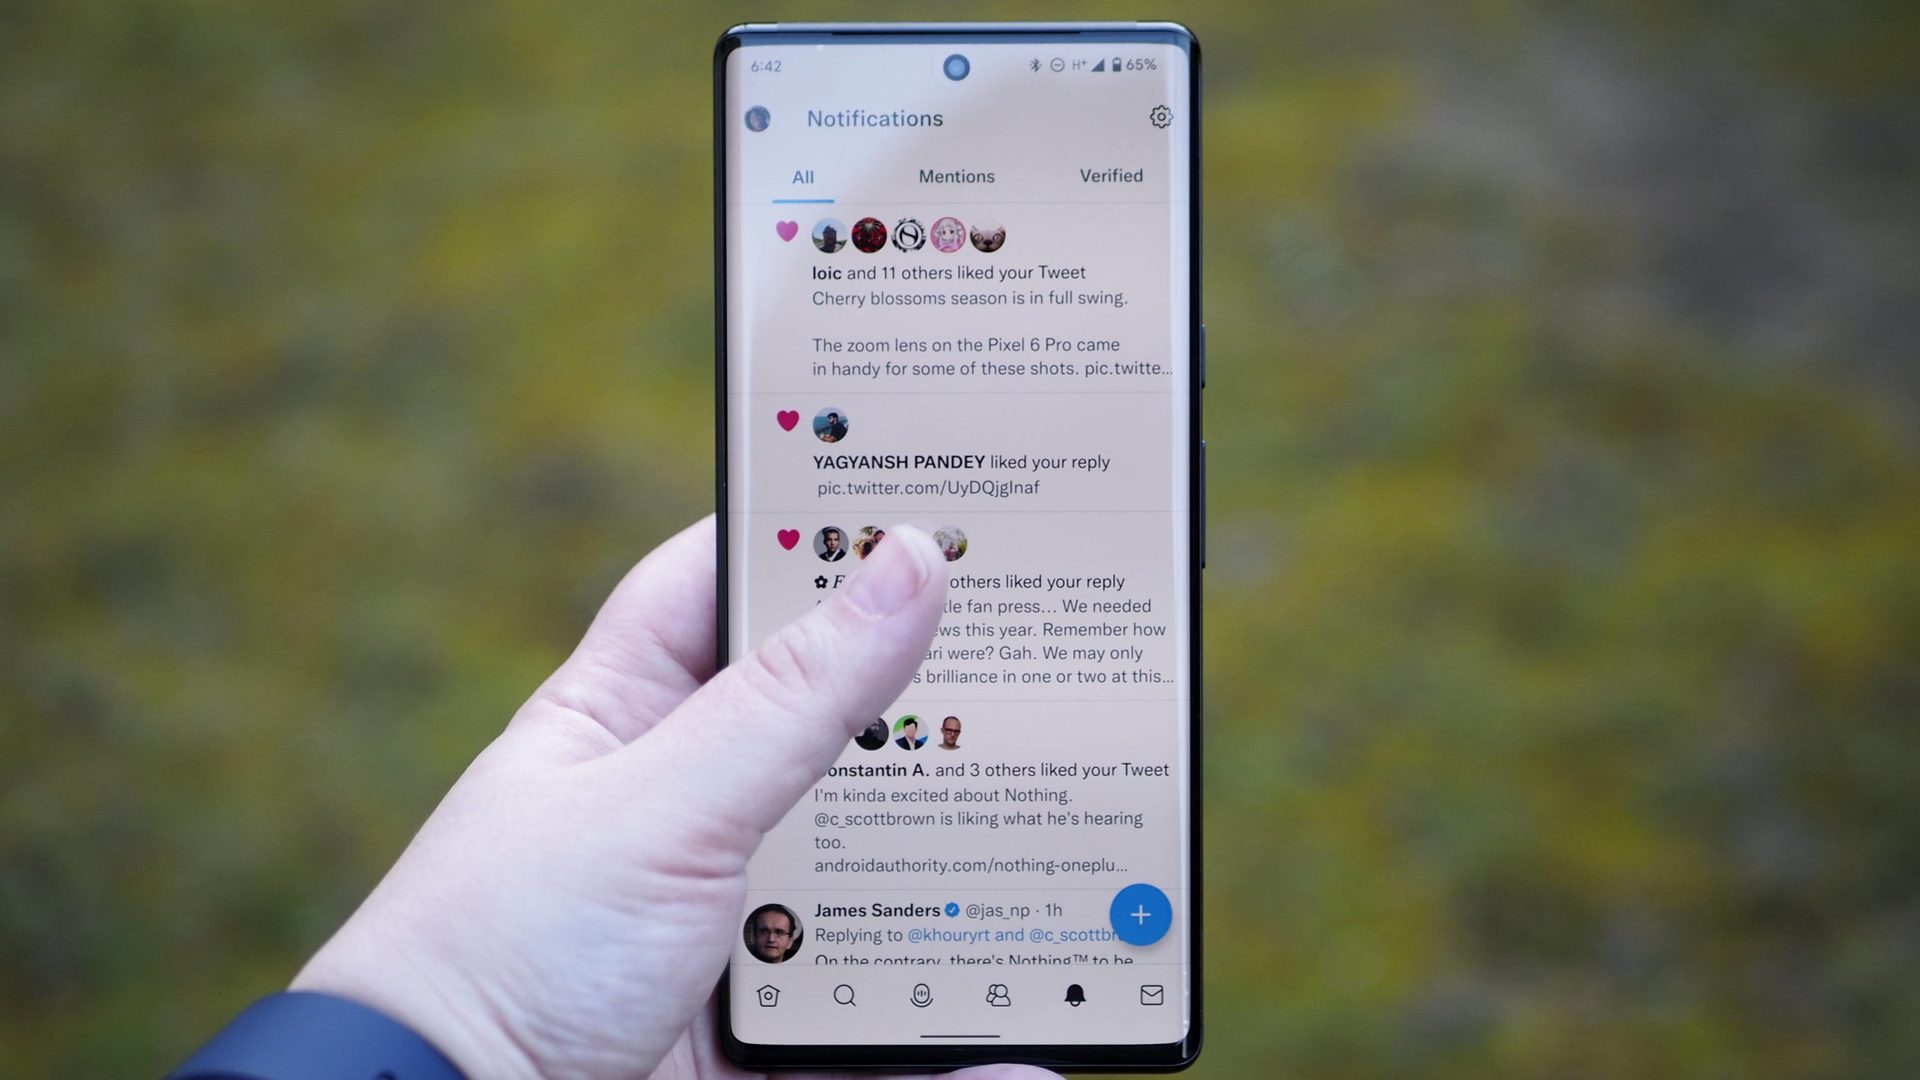 Google Pixel 6 Pro in front of Twitter with a visible thumb